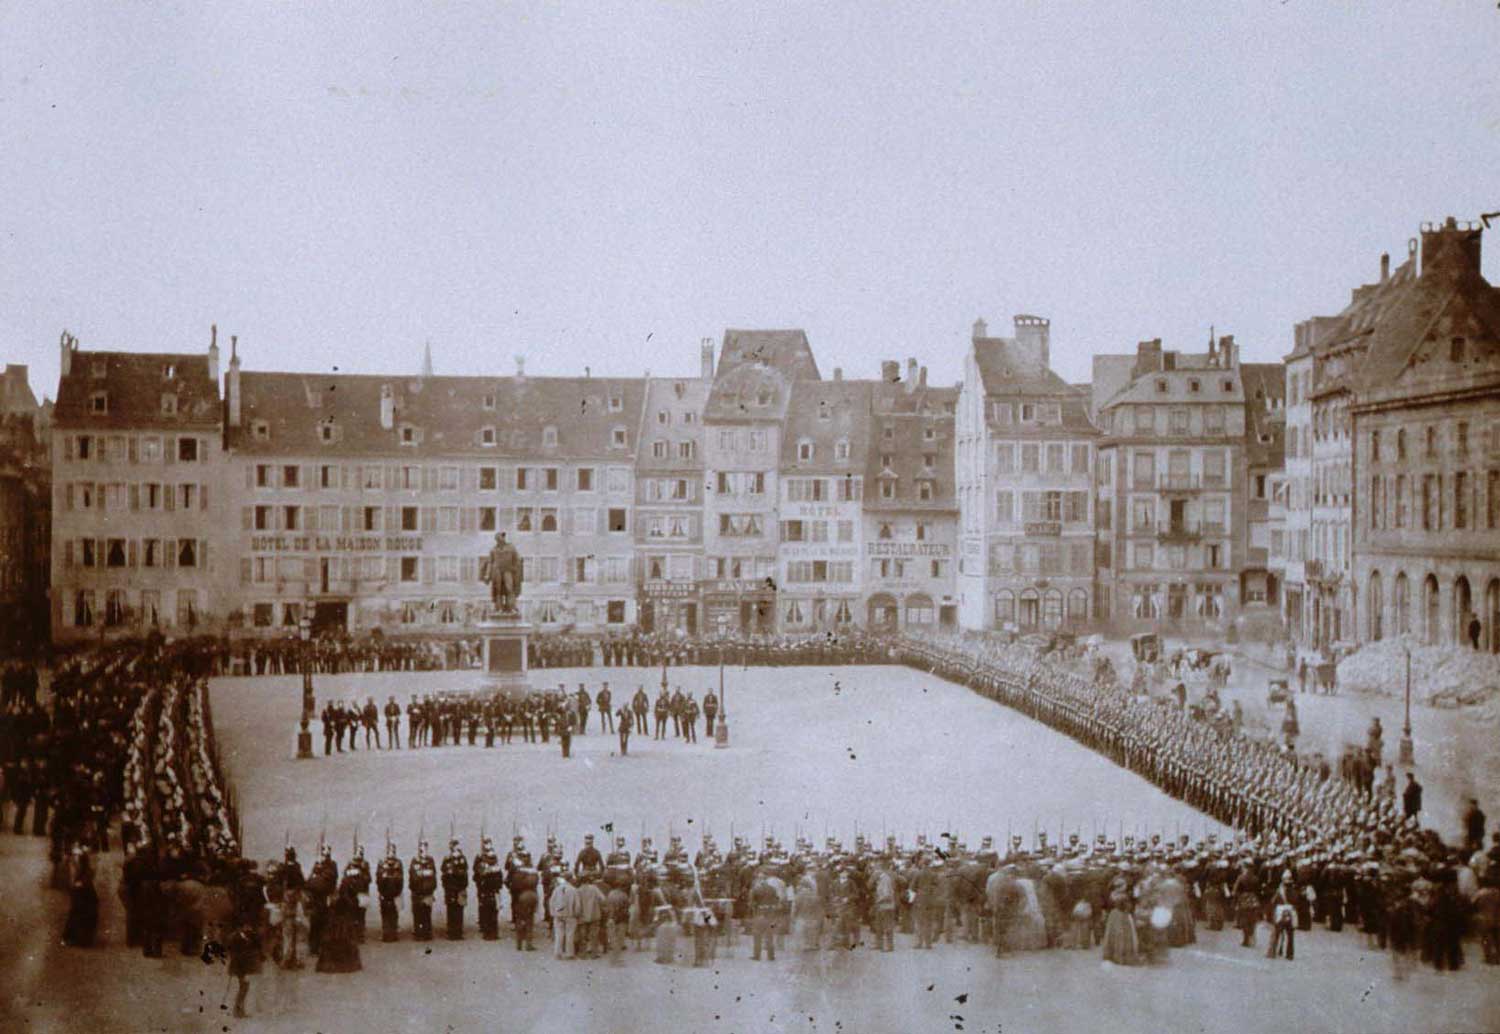 A military parade when Strasbourg is no longer French in 1871